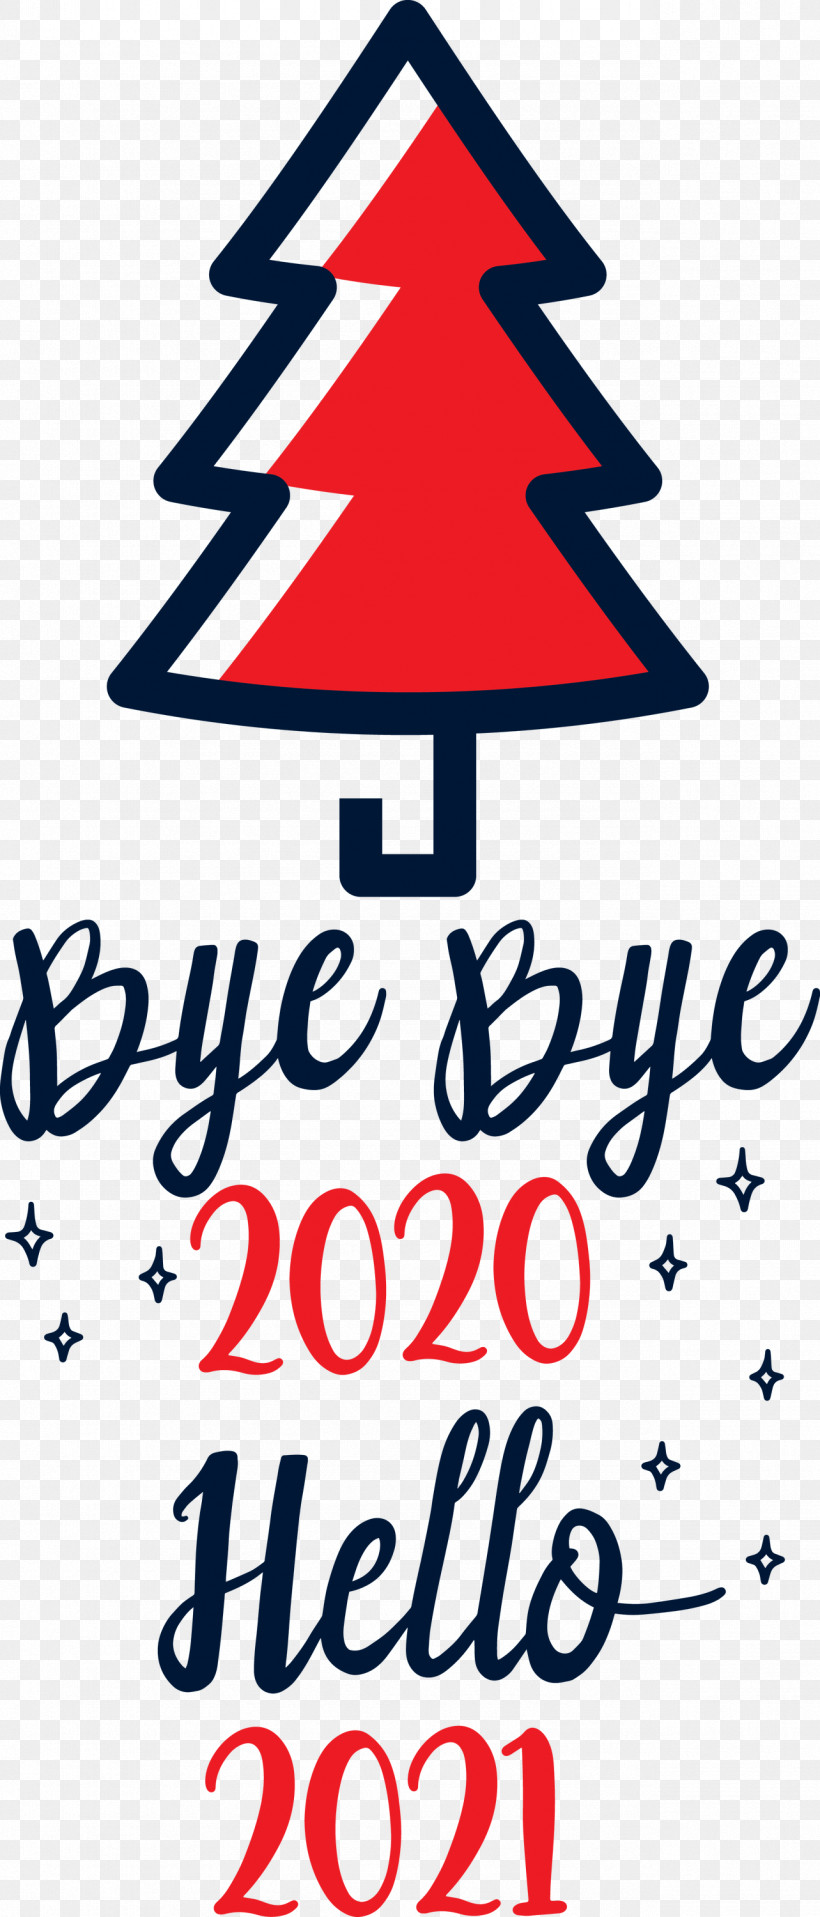 Hello 2021 Year Bye Bye 2020 Year, PNG, 1283x3000px, Hello 2021 Year, Abstract Art, Animation, Bye Bye 2020 Year, Christmas Day Download Free